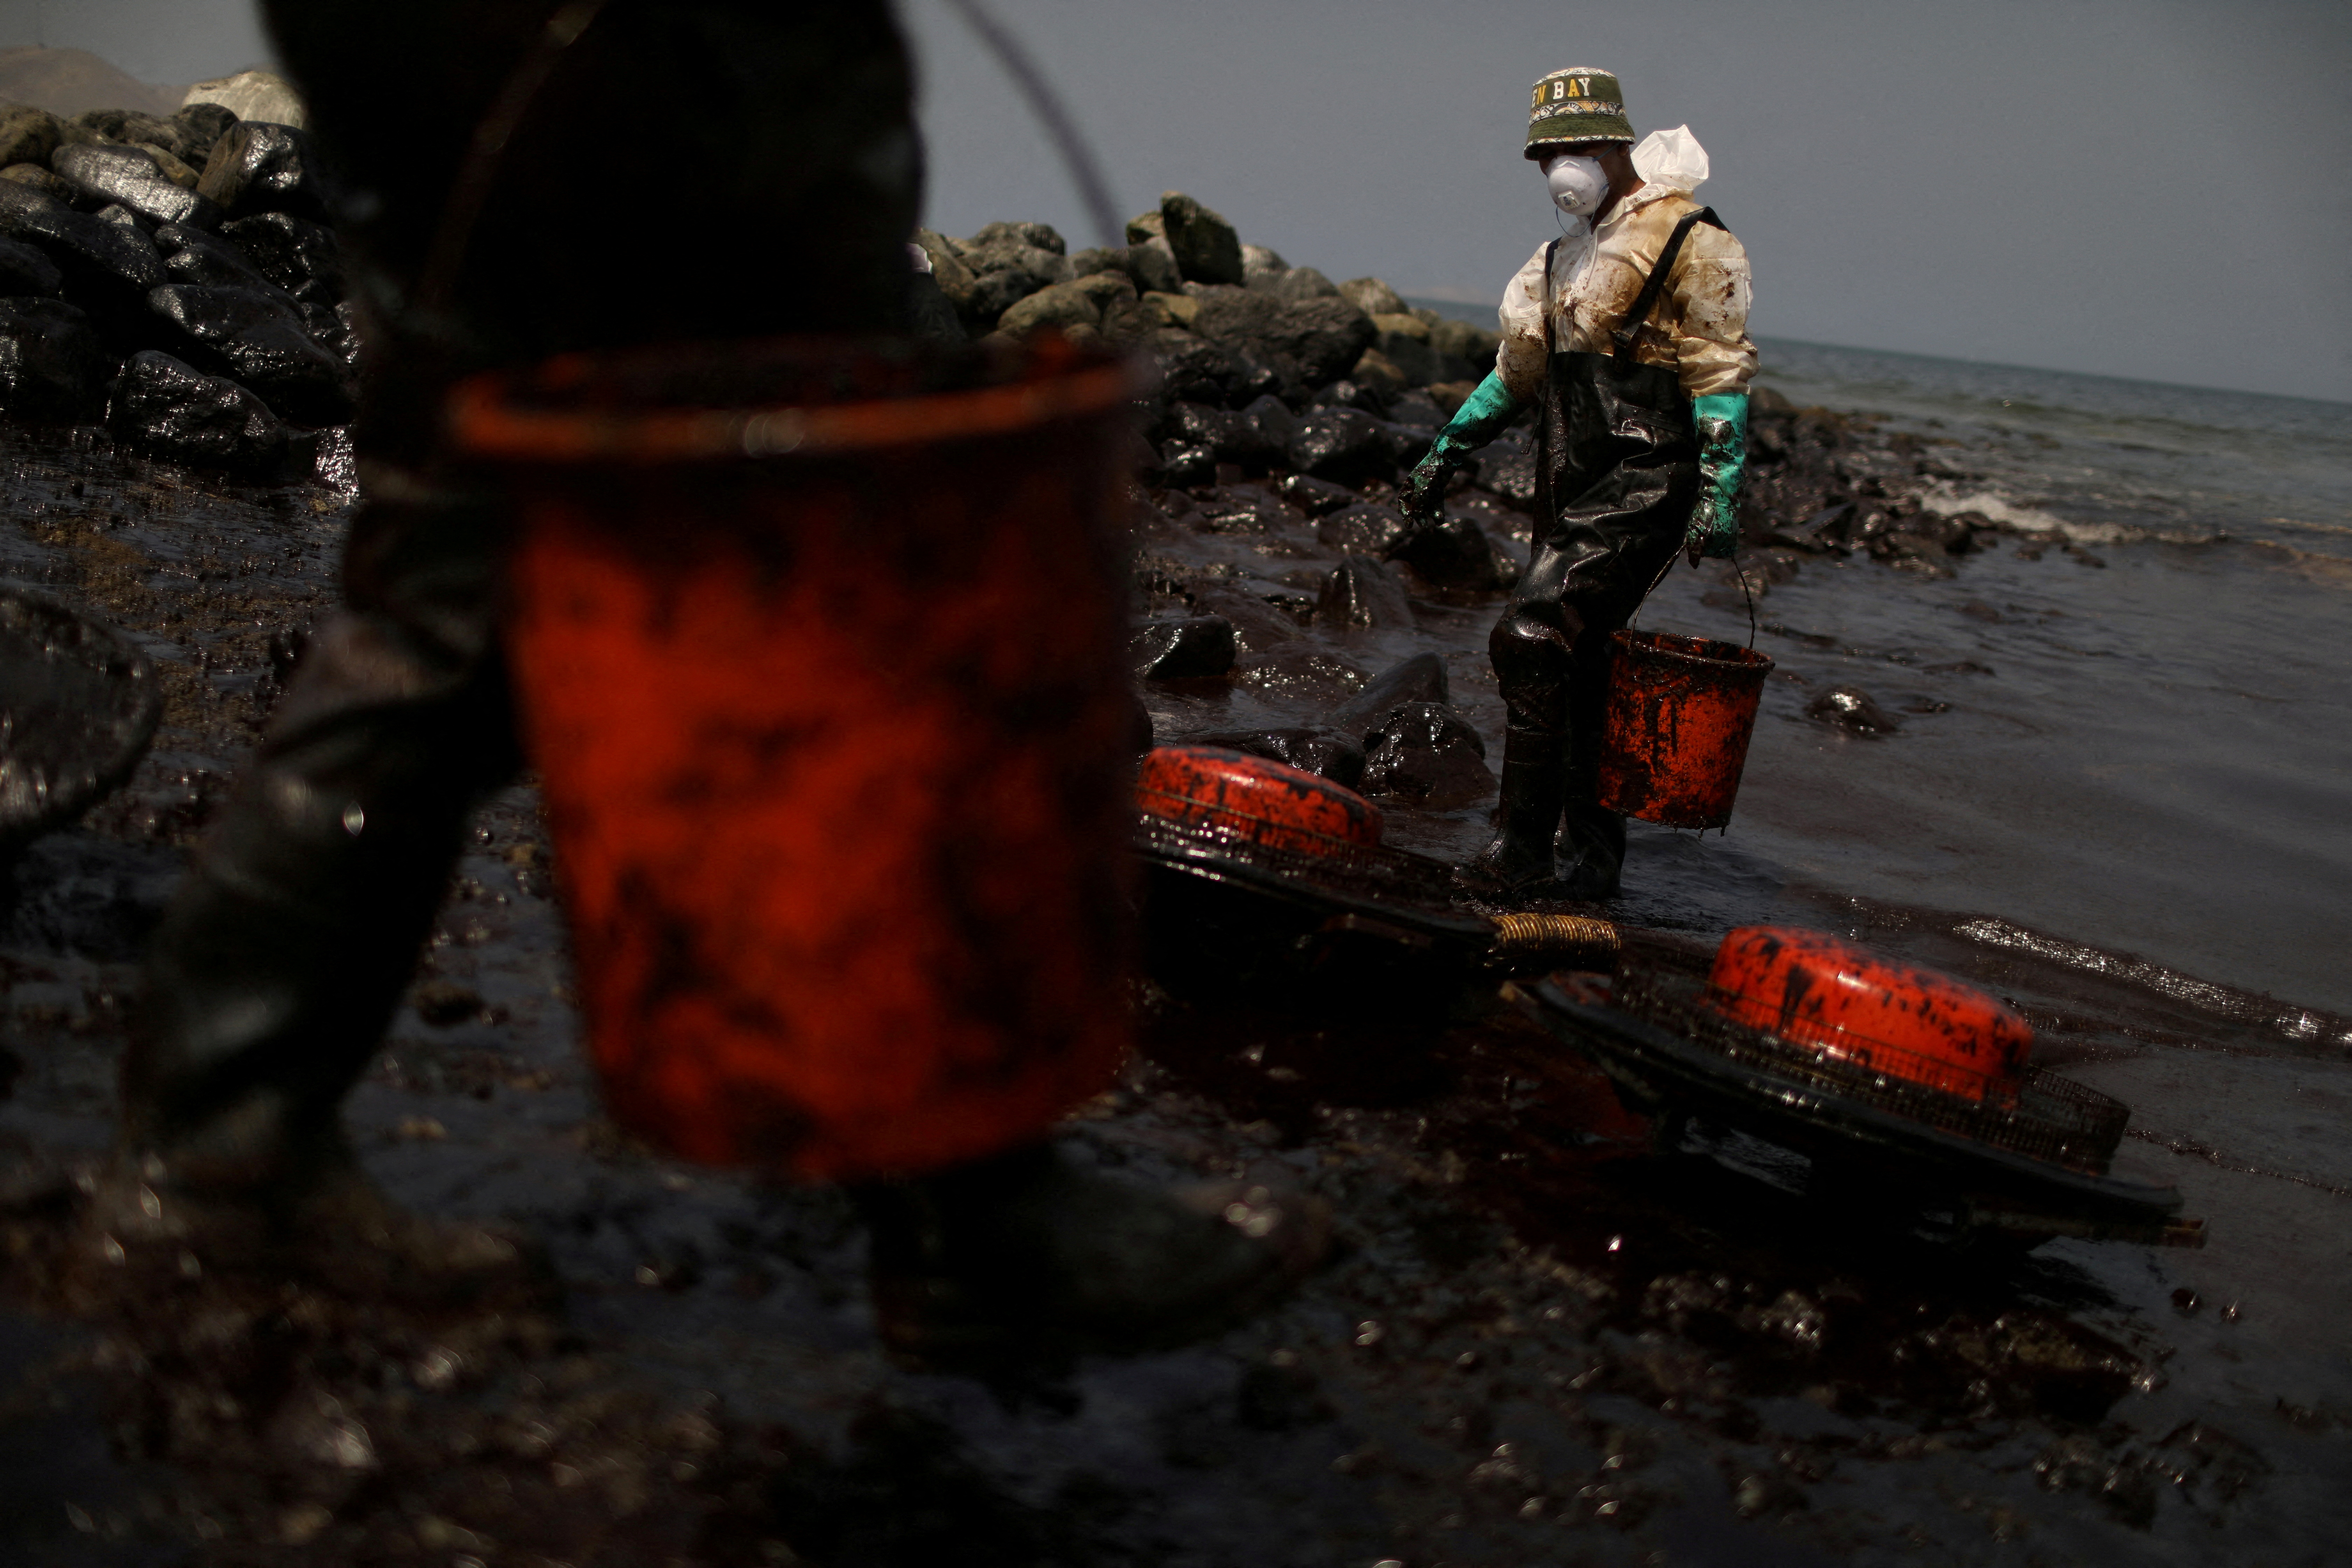 Workers clean up an oil spill following an underwater volcanic eruption, in Ancon